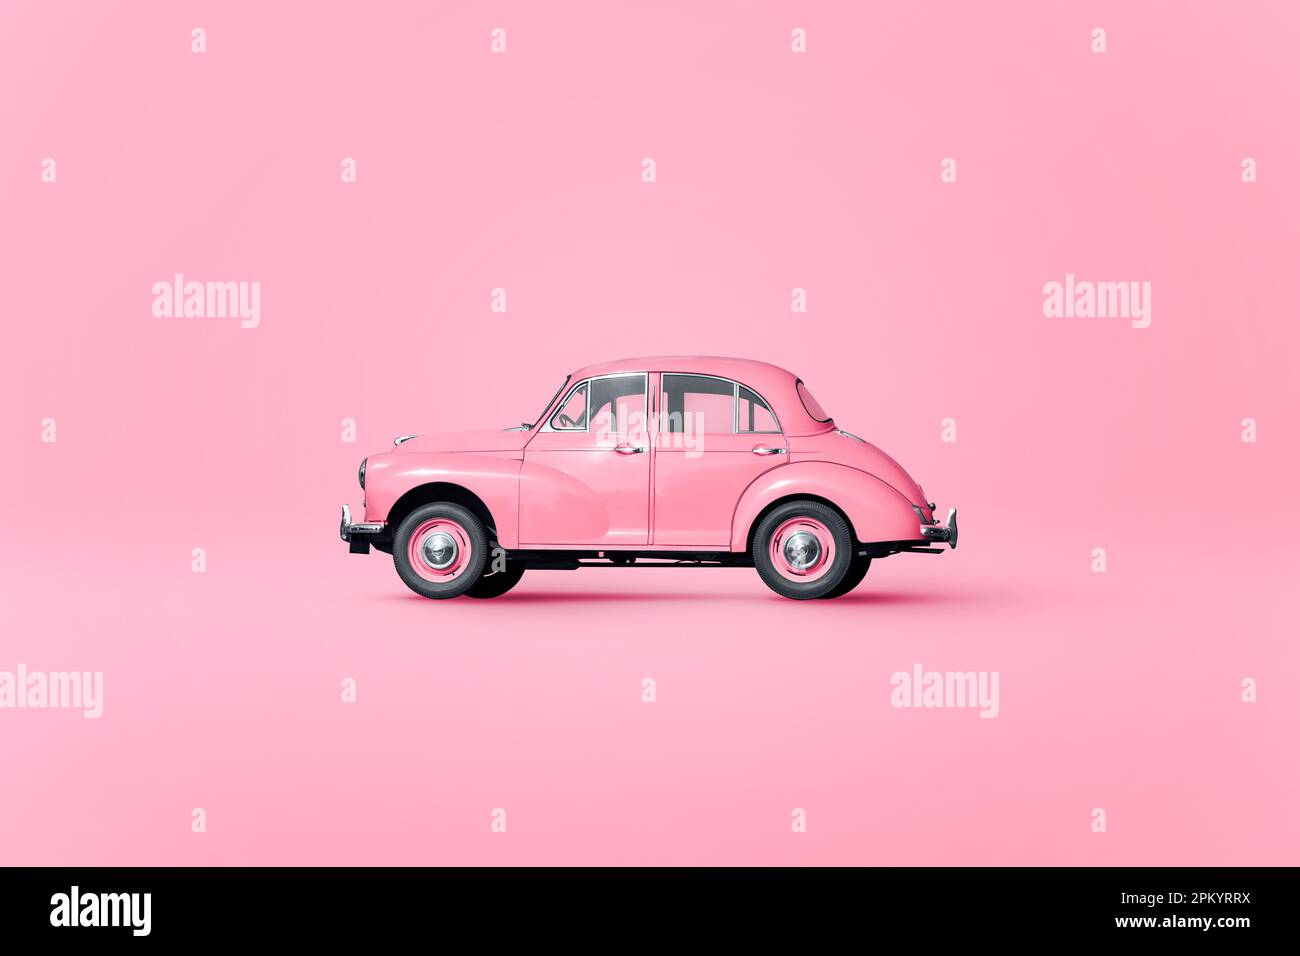 Vintage retro automobile figurine with black wheels parked on pink background in studio Stock Photo